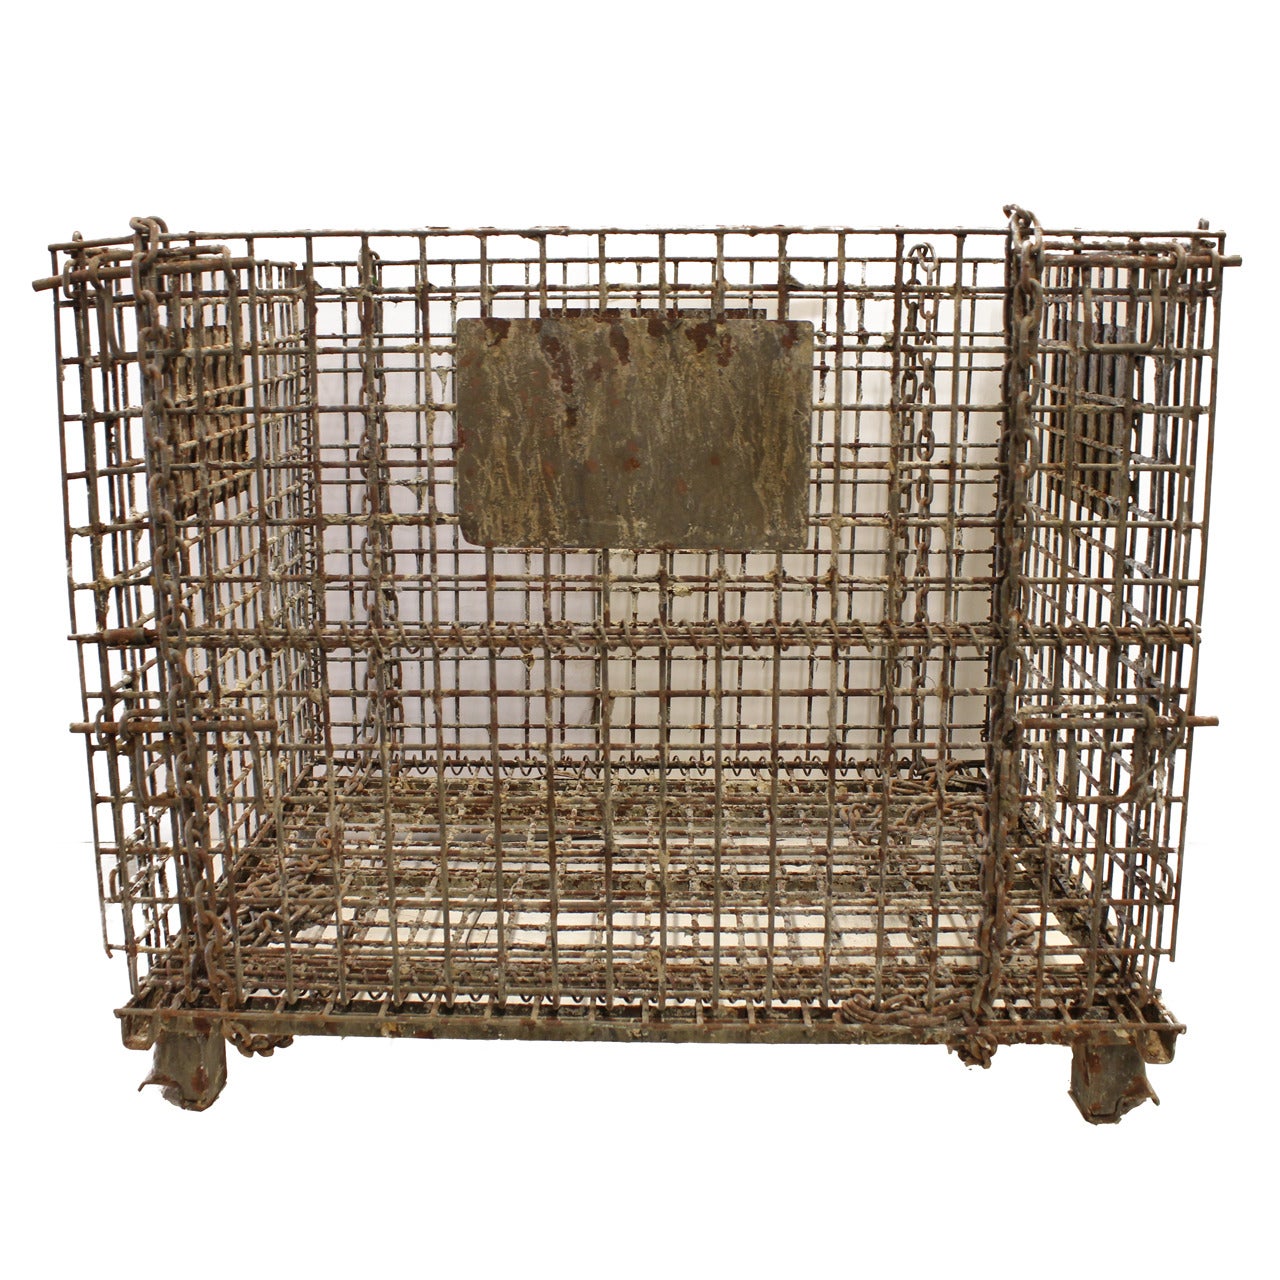 Giant Antique American Industrial Collapsible Basket, more available For Sale